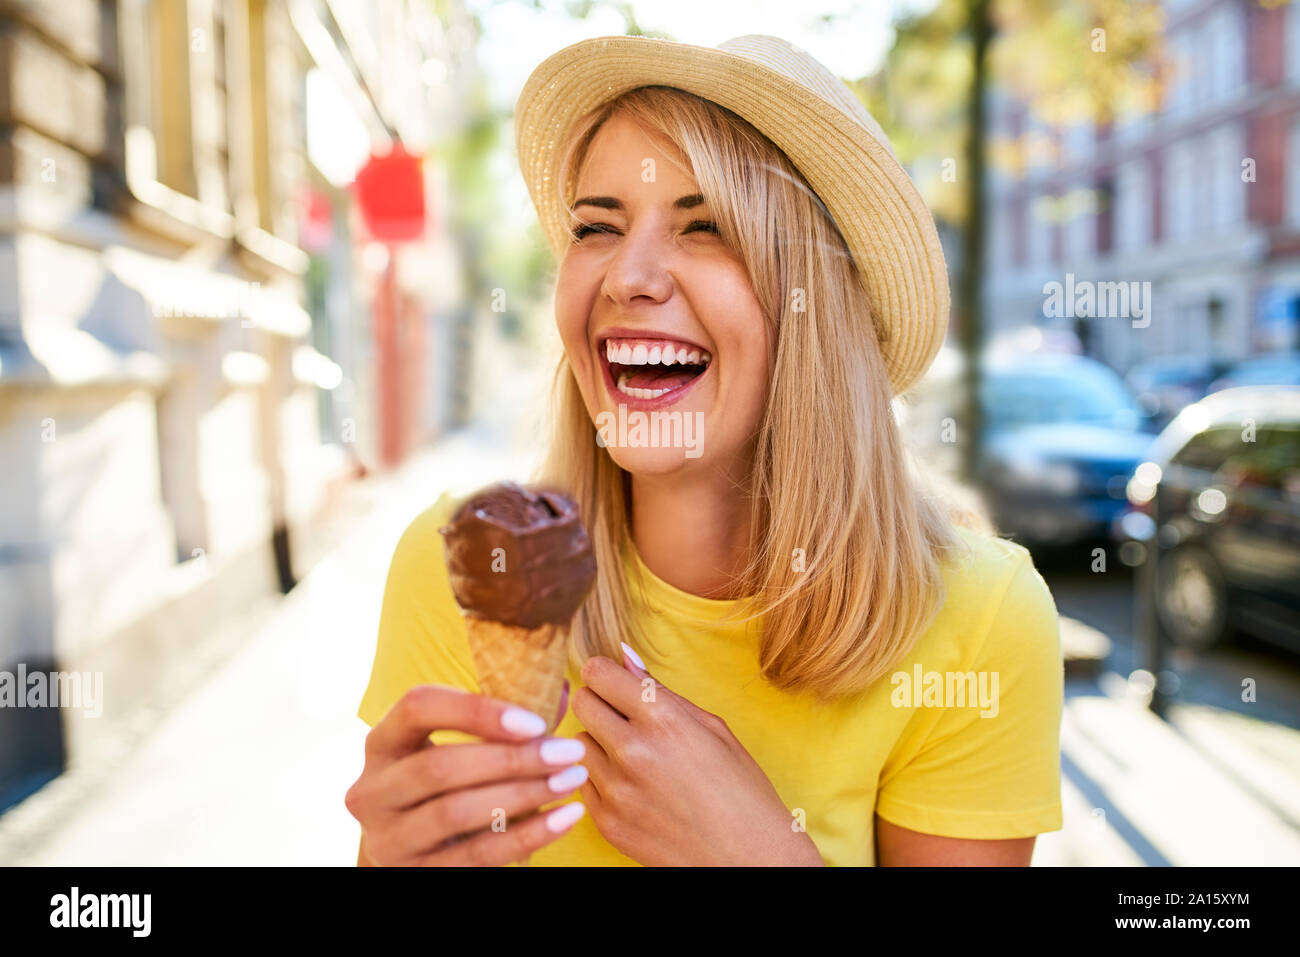 Carefree young woman enjoying an ice cream in the city Stock Photo